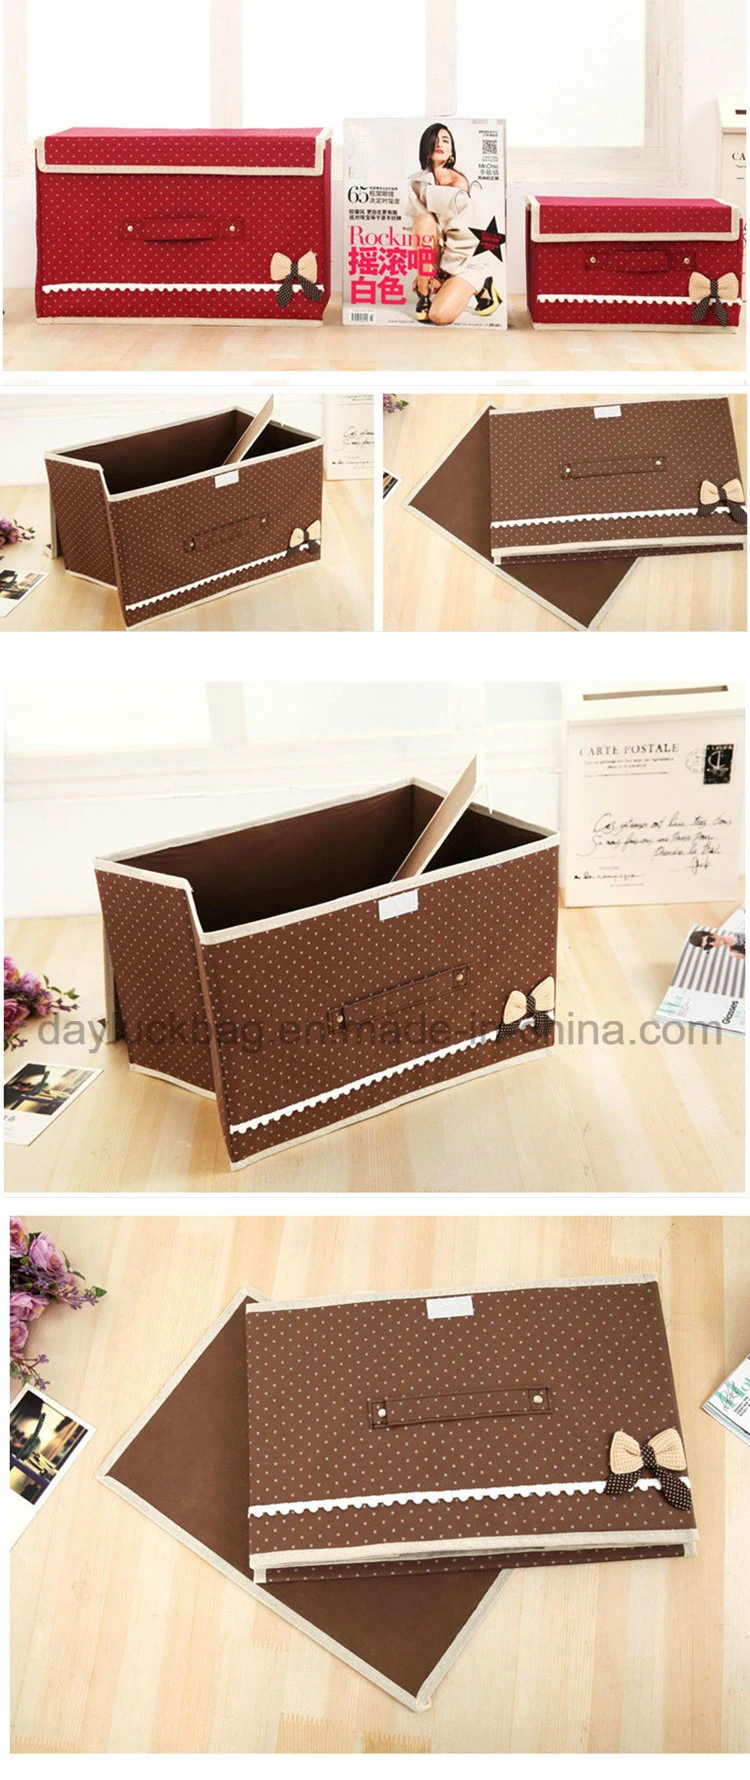 Large Foldable Storage Box with Lid for Bed Room or Living Room